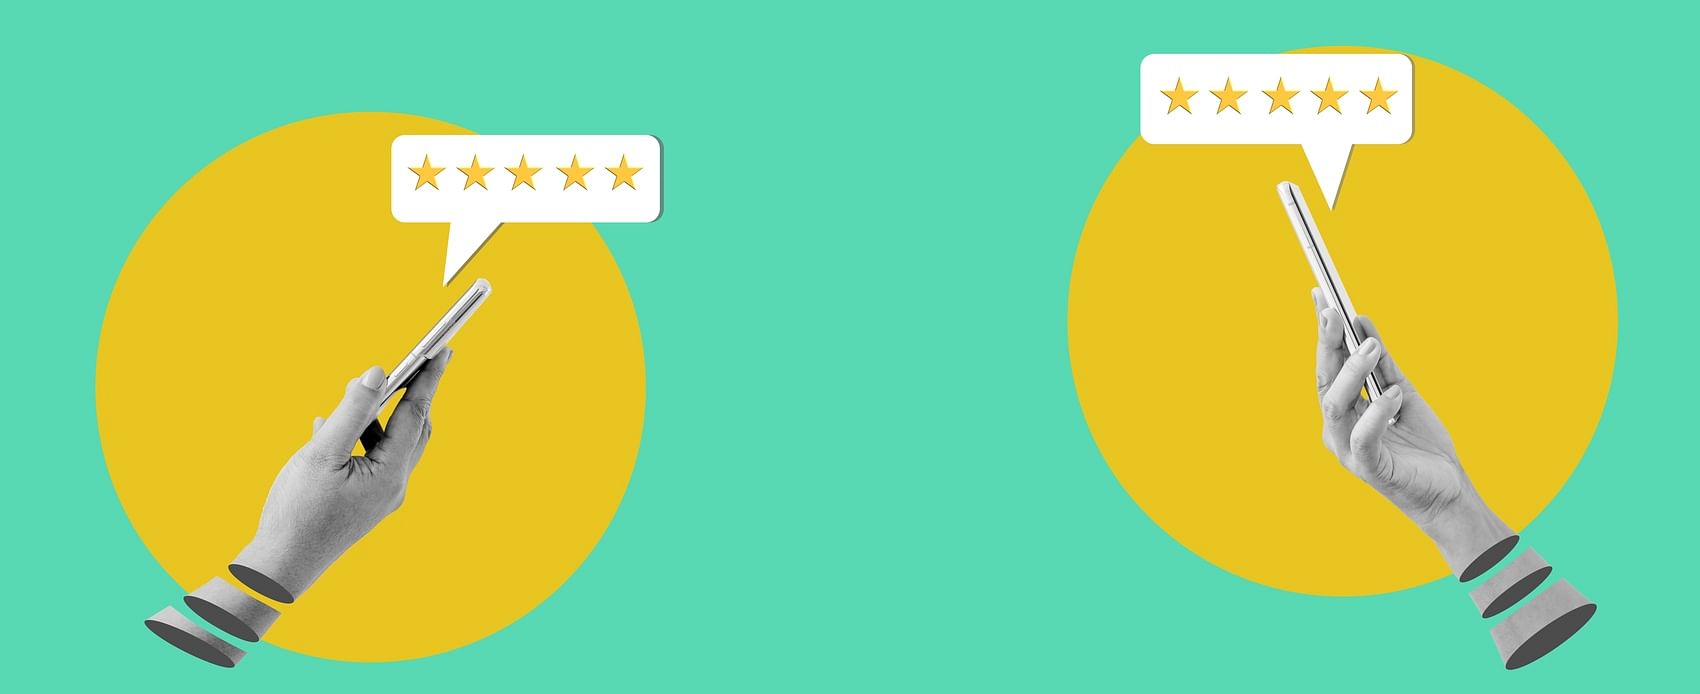 an illustration of customer reviews, showcasing two hands holding mobile phones. Each device displays a 5-star review bubble hovering above them